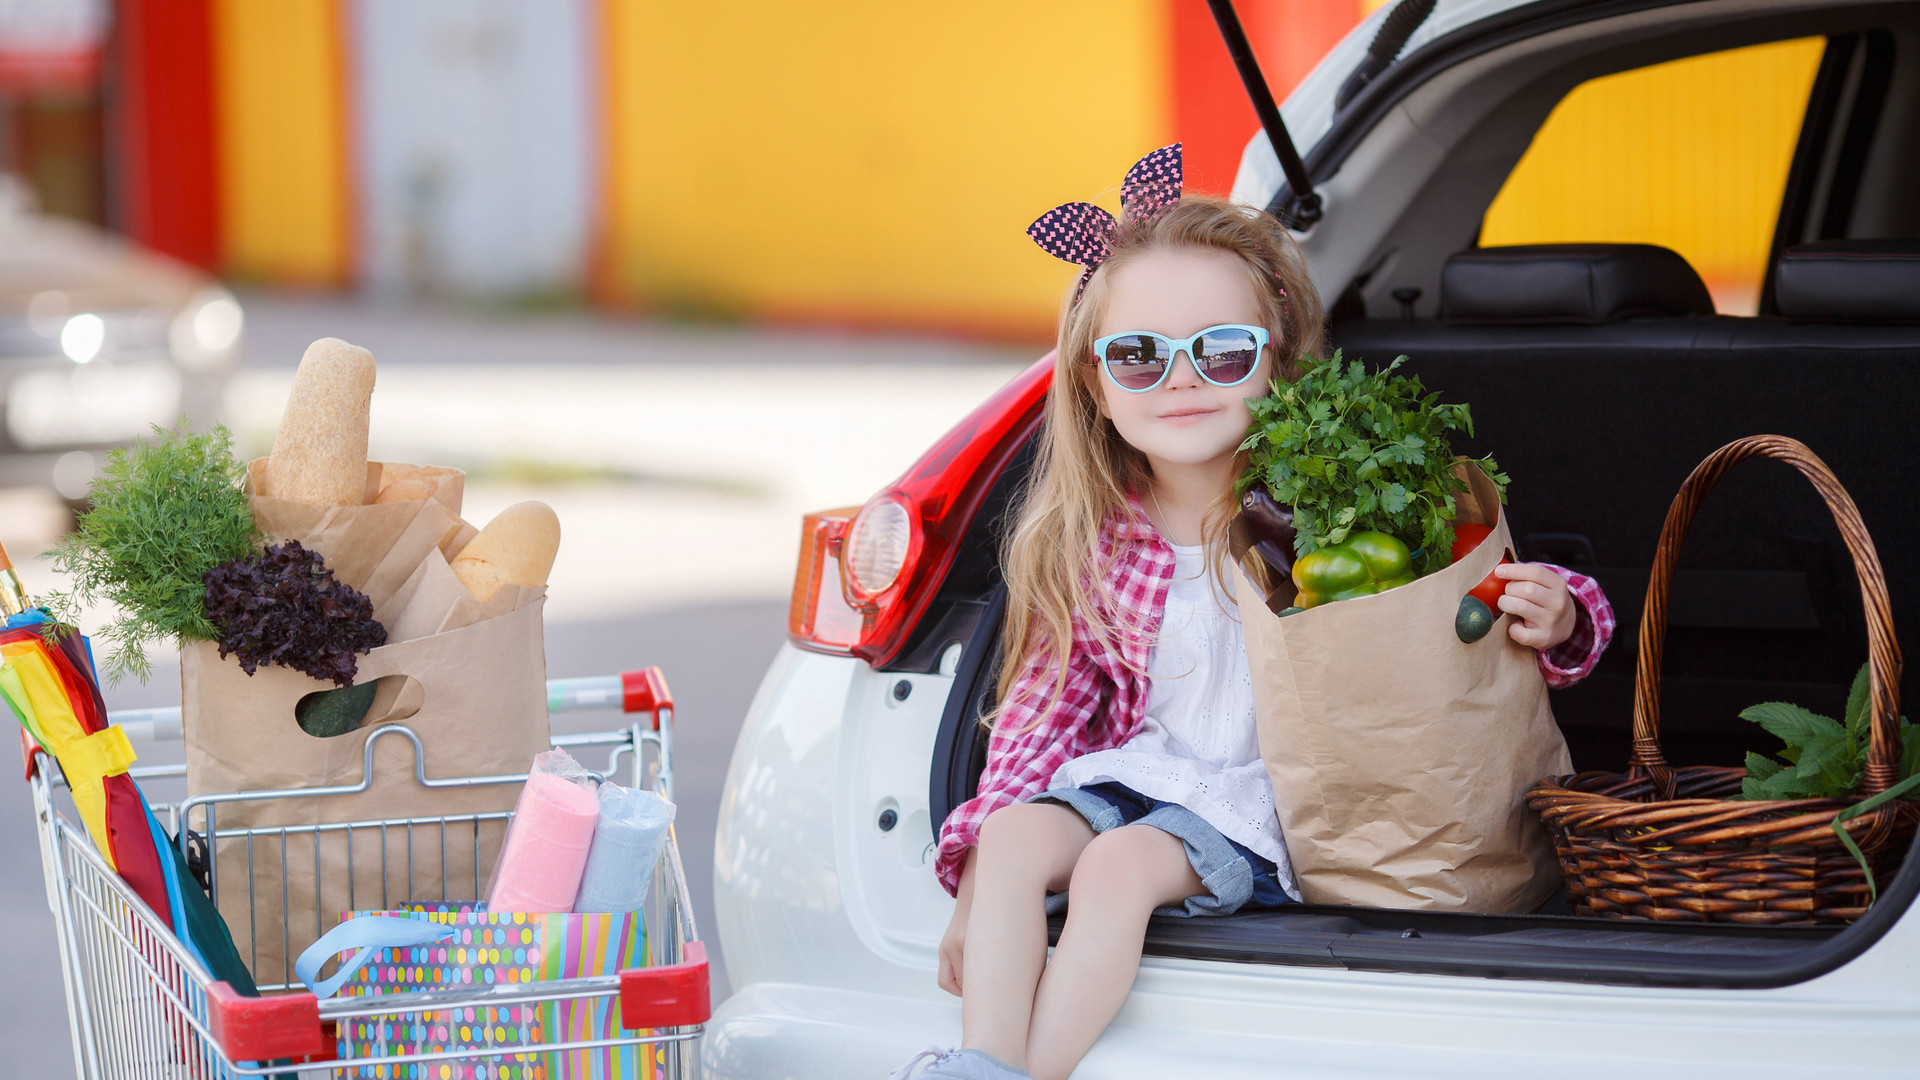 Little girl-the buyer of products, sitting in the open trunk of a car